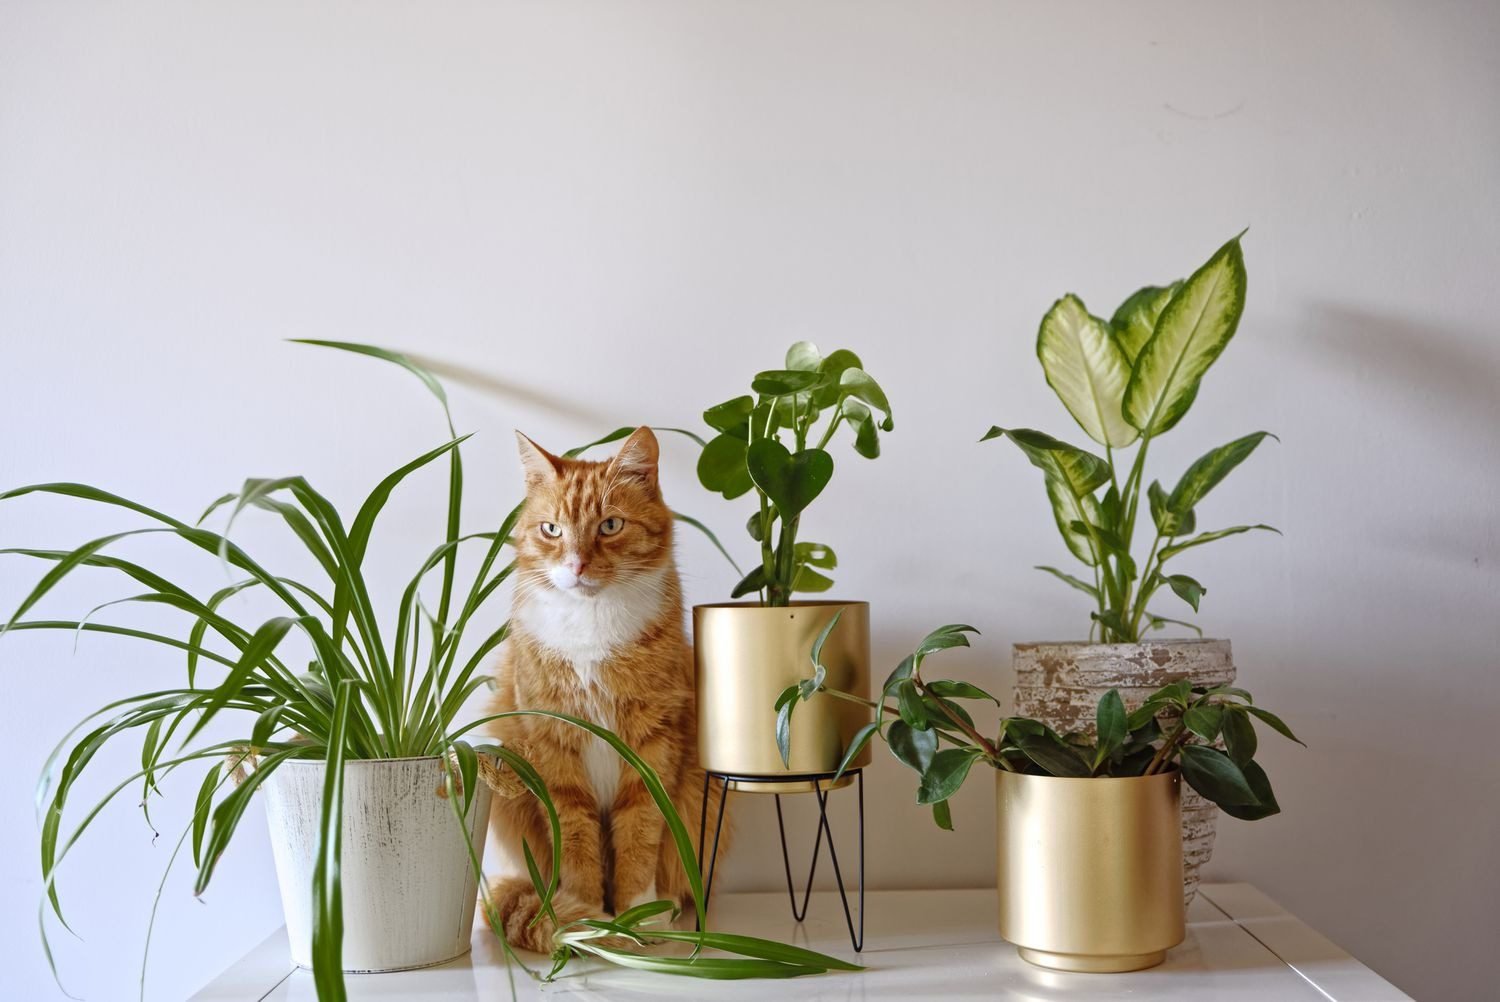 Safe Alternatives and Non-Toxic Plants for Cats